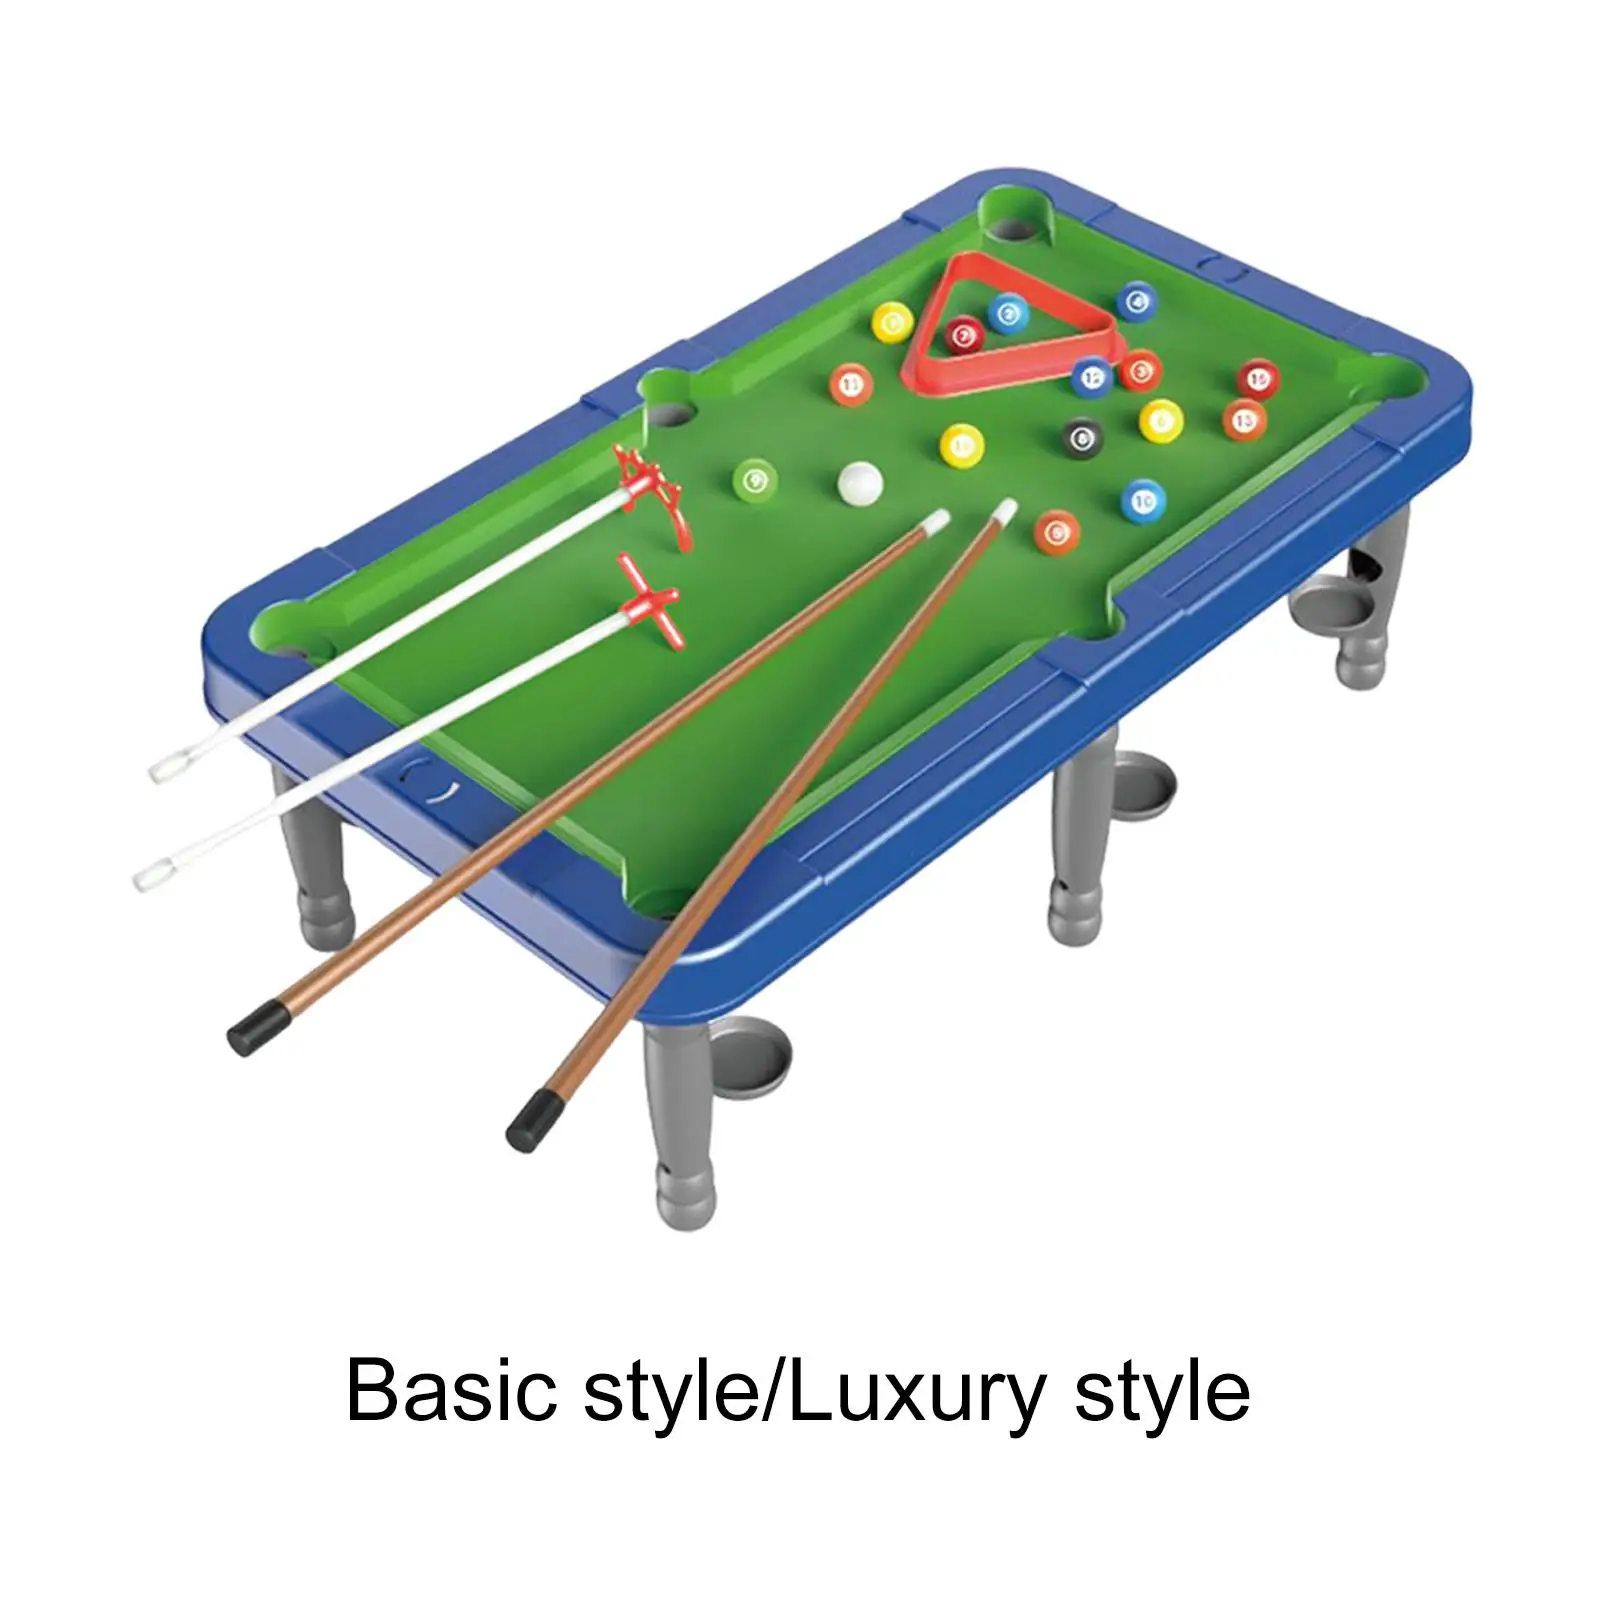 Portable Pool Table Set Home Office Use Tabletop Billiards for Children Kids